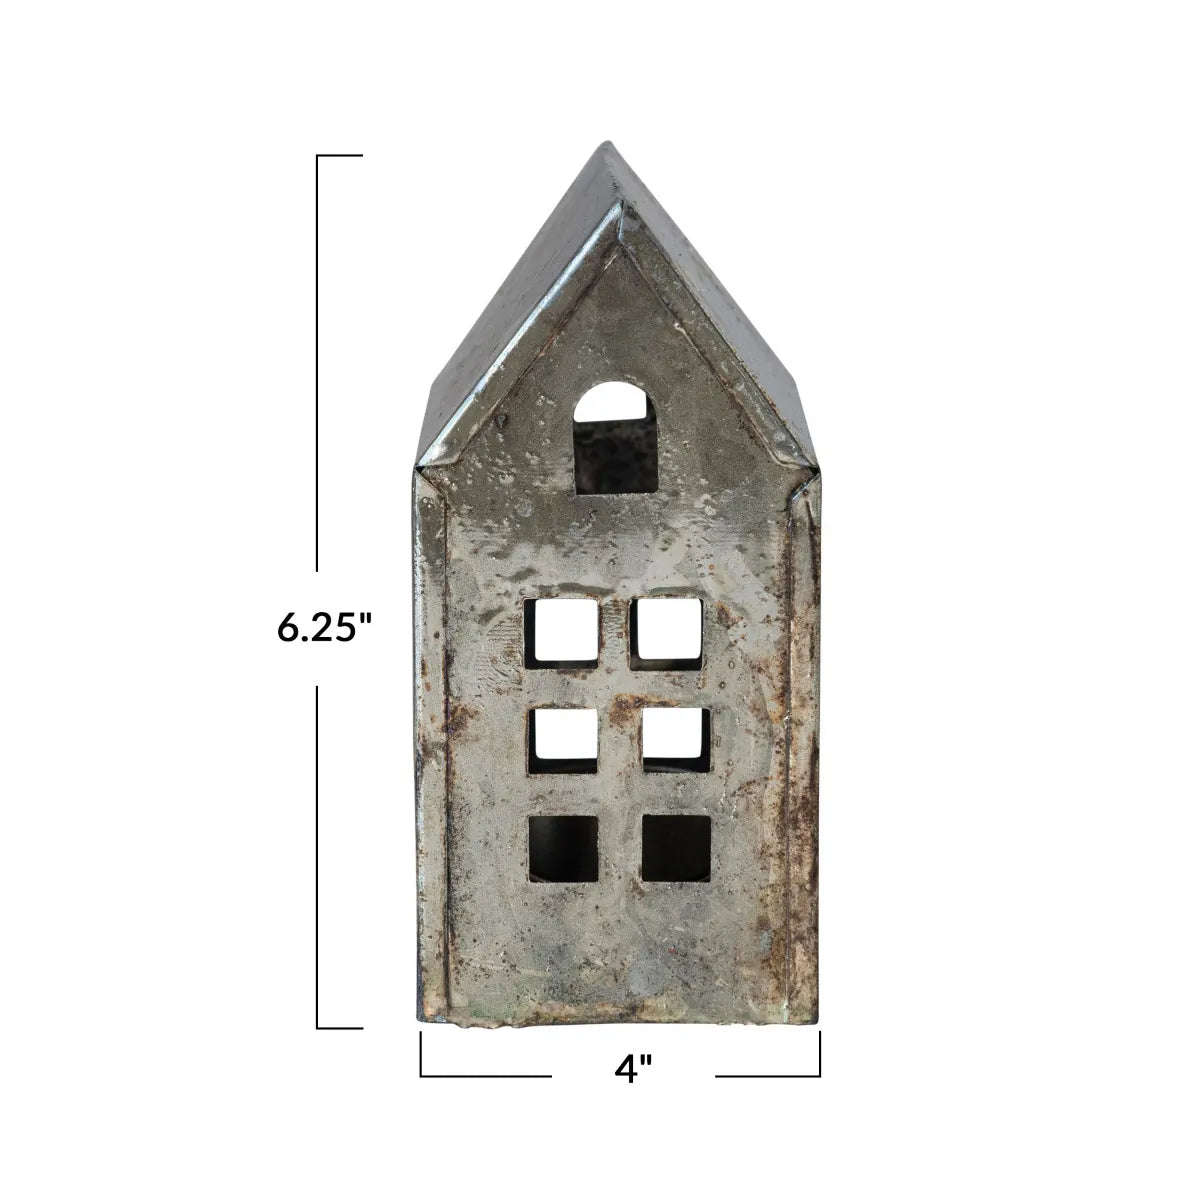 Large pewter miniture house measures 4-inches wide by 6-inches high. 